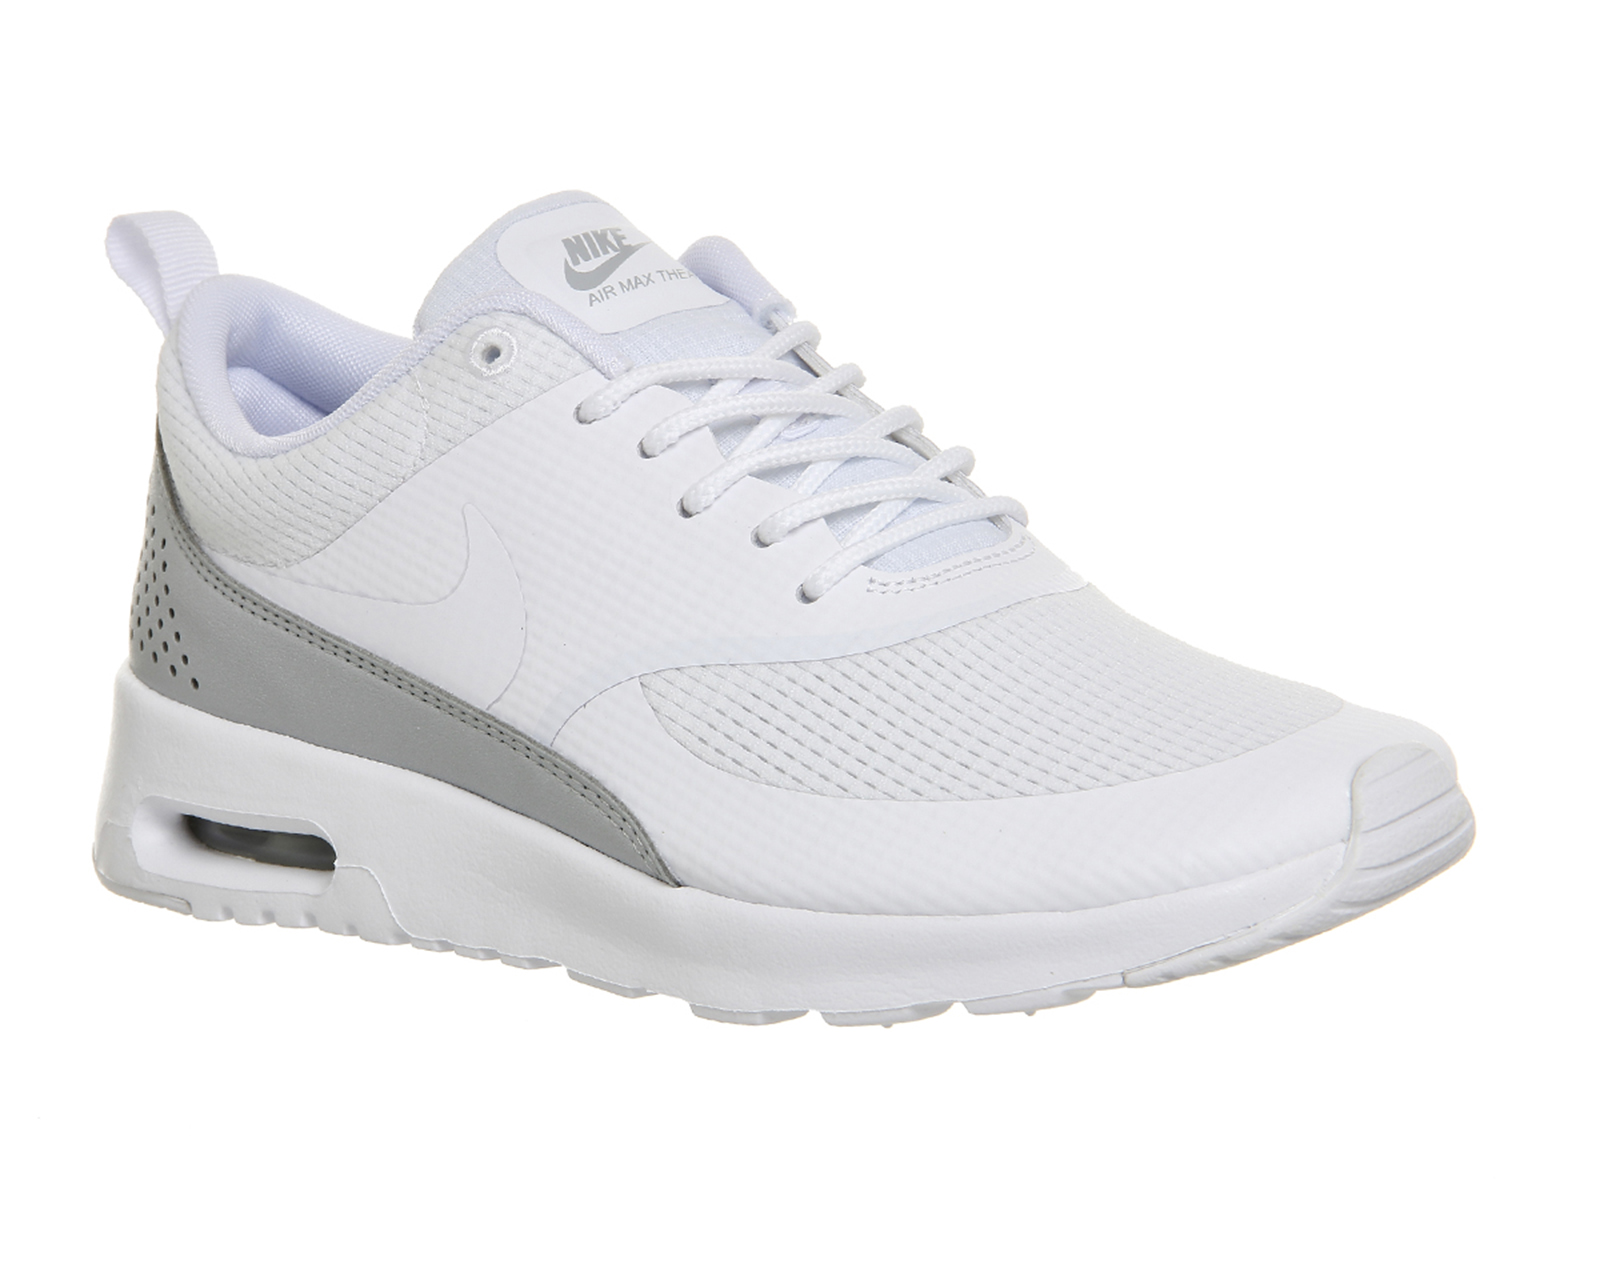 Nike Air Max Thea White Txt - Hers trainers